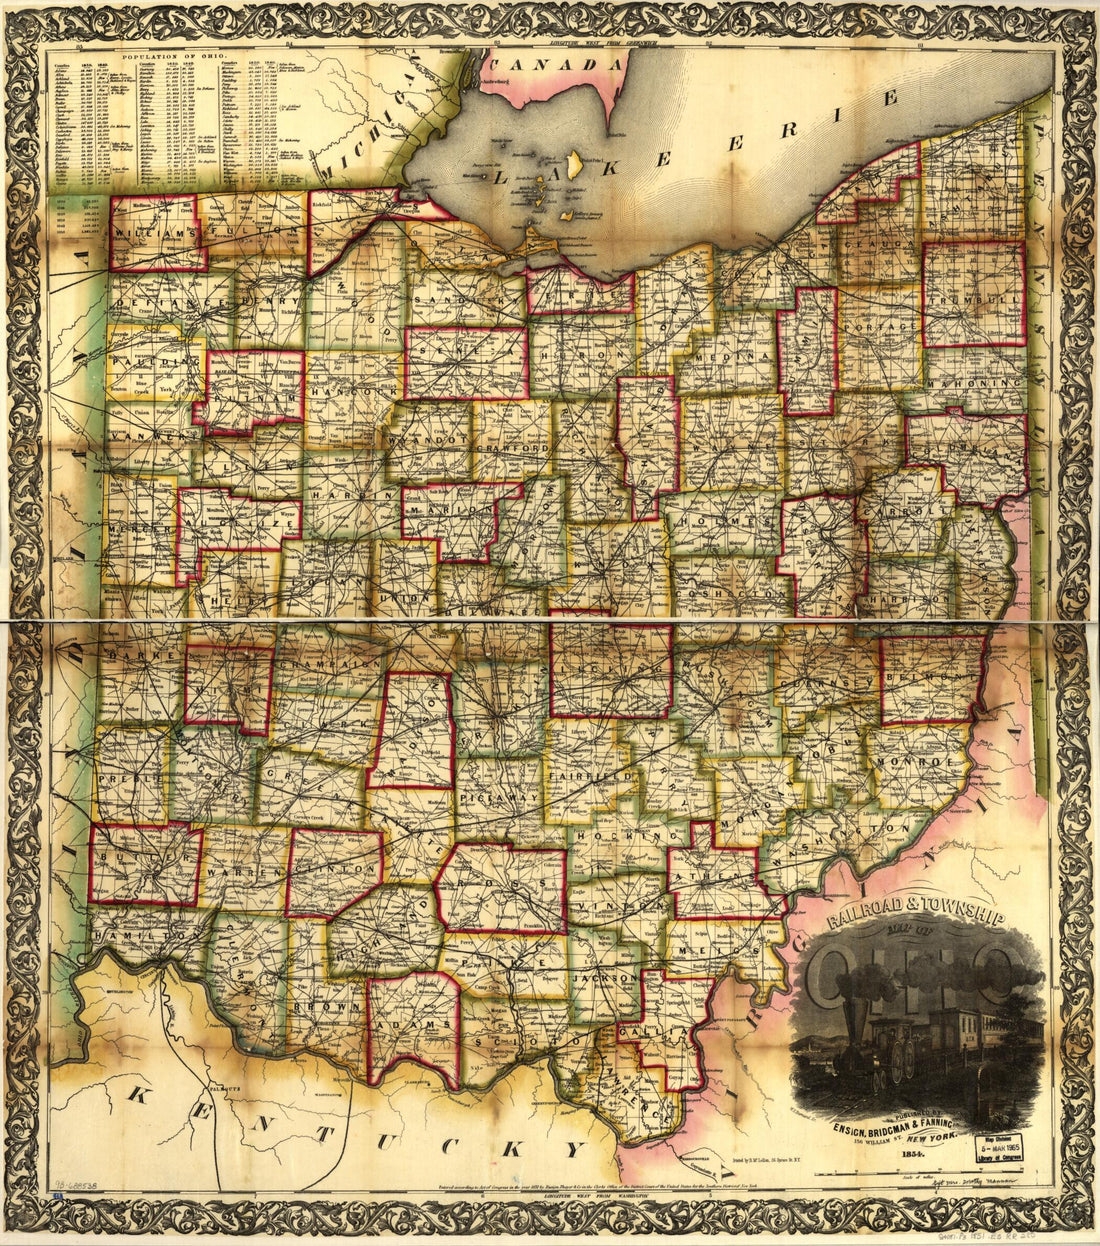 This old map of Railroad &amp; Township Map of Ohio from 1854 was created by Bridgman &amp; Fanning Ensign in 1854